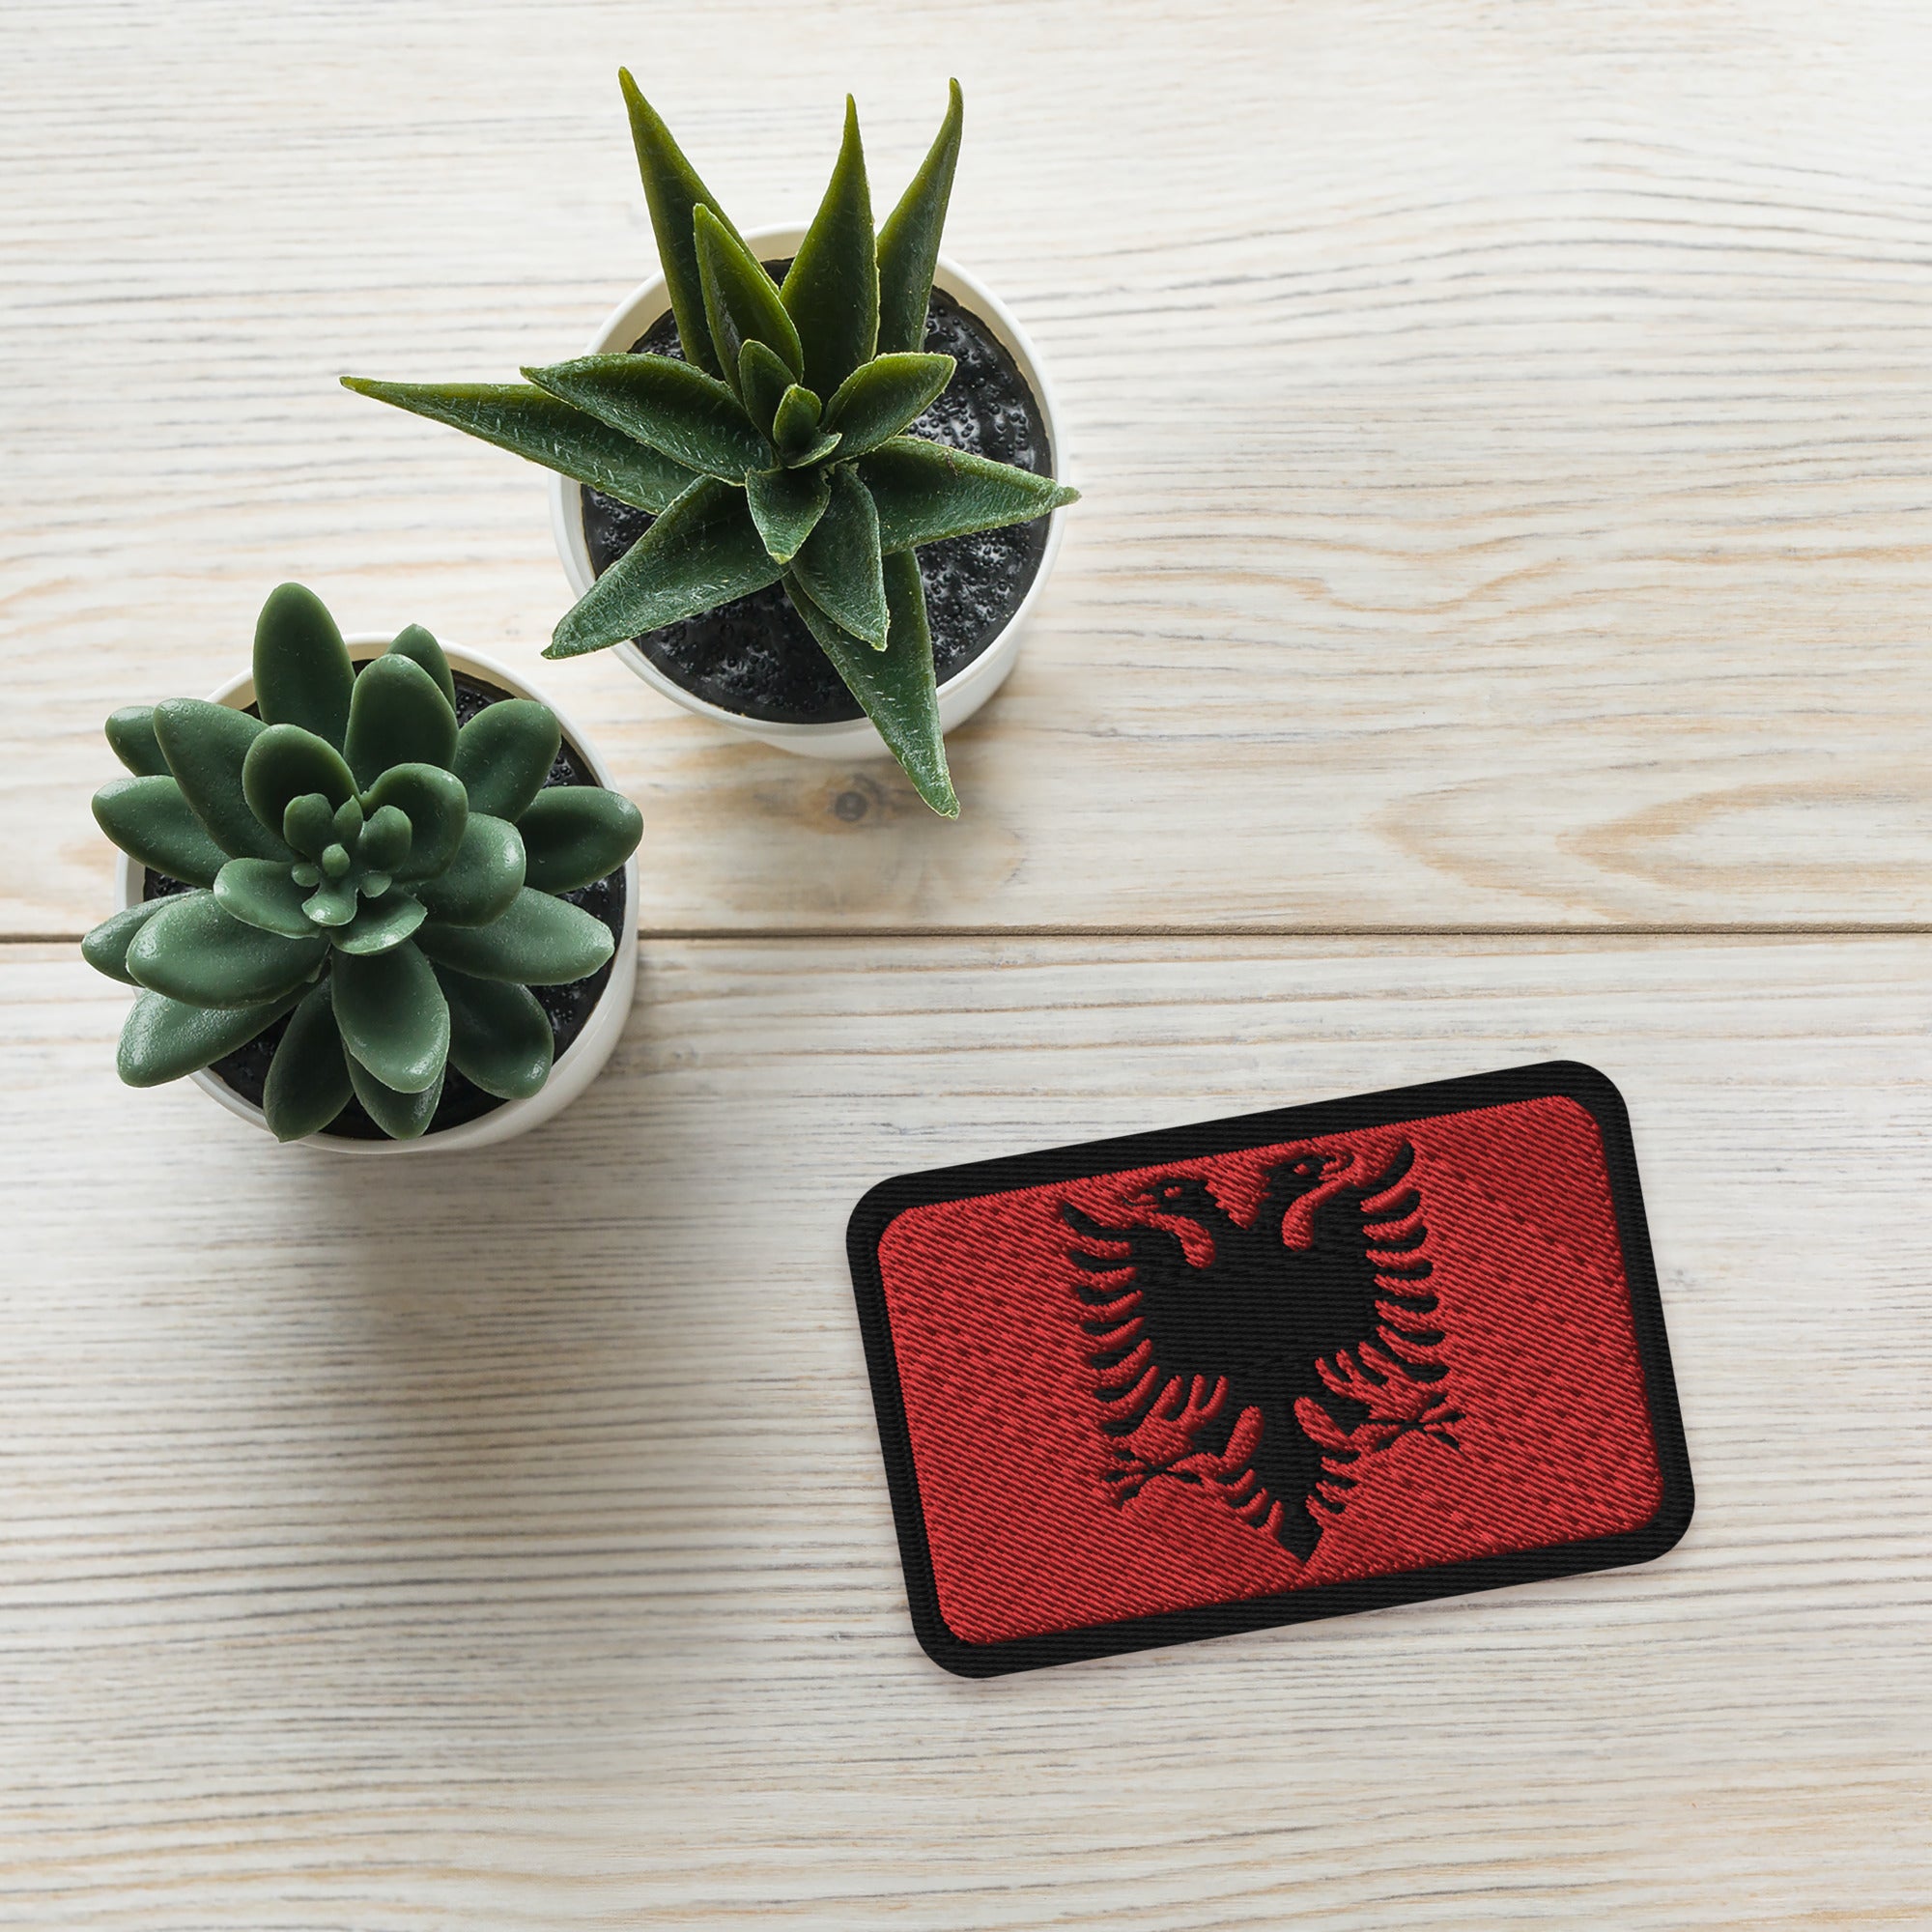 Albanian flag embroidered patches.